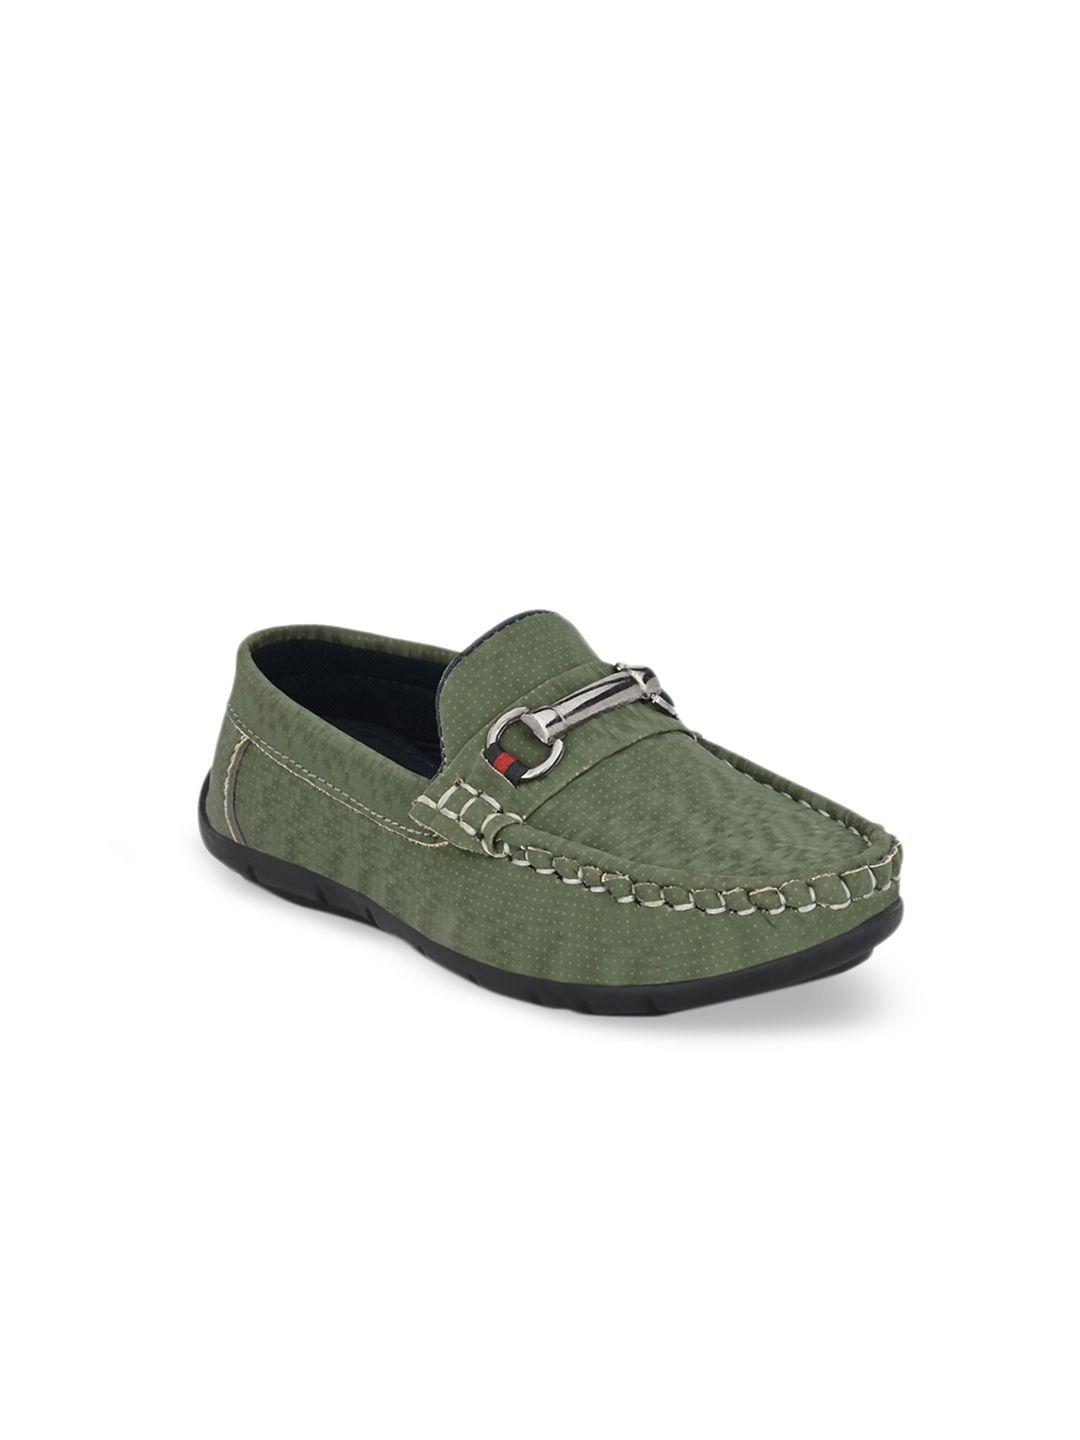 tuskey boys olive green woven design loafers